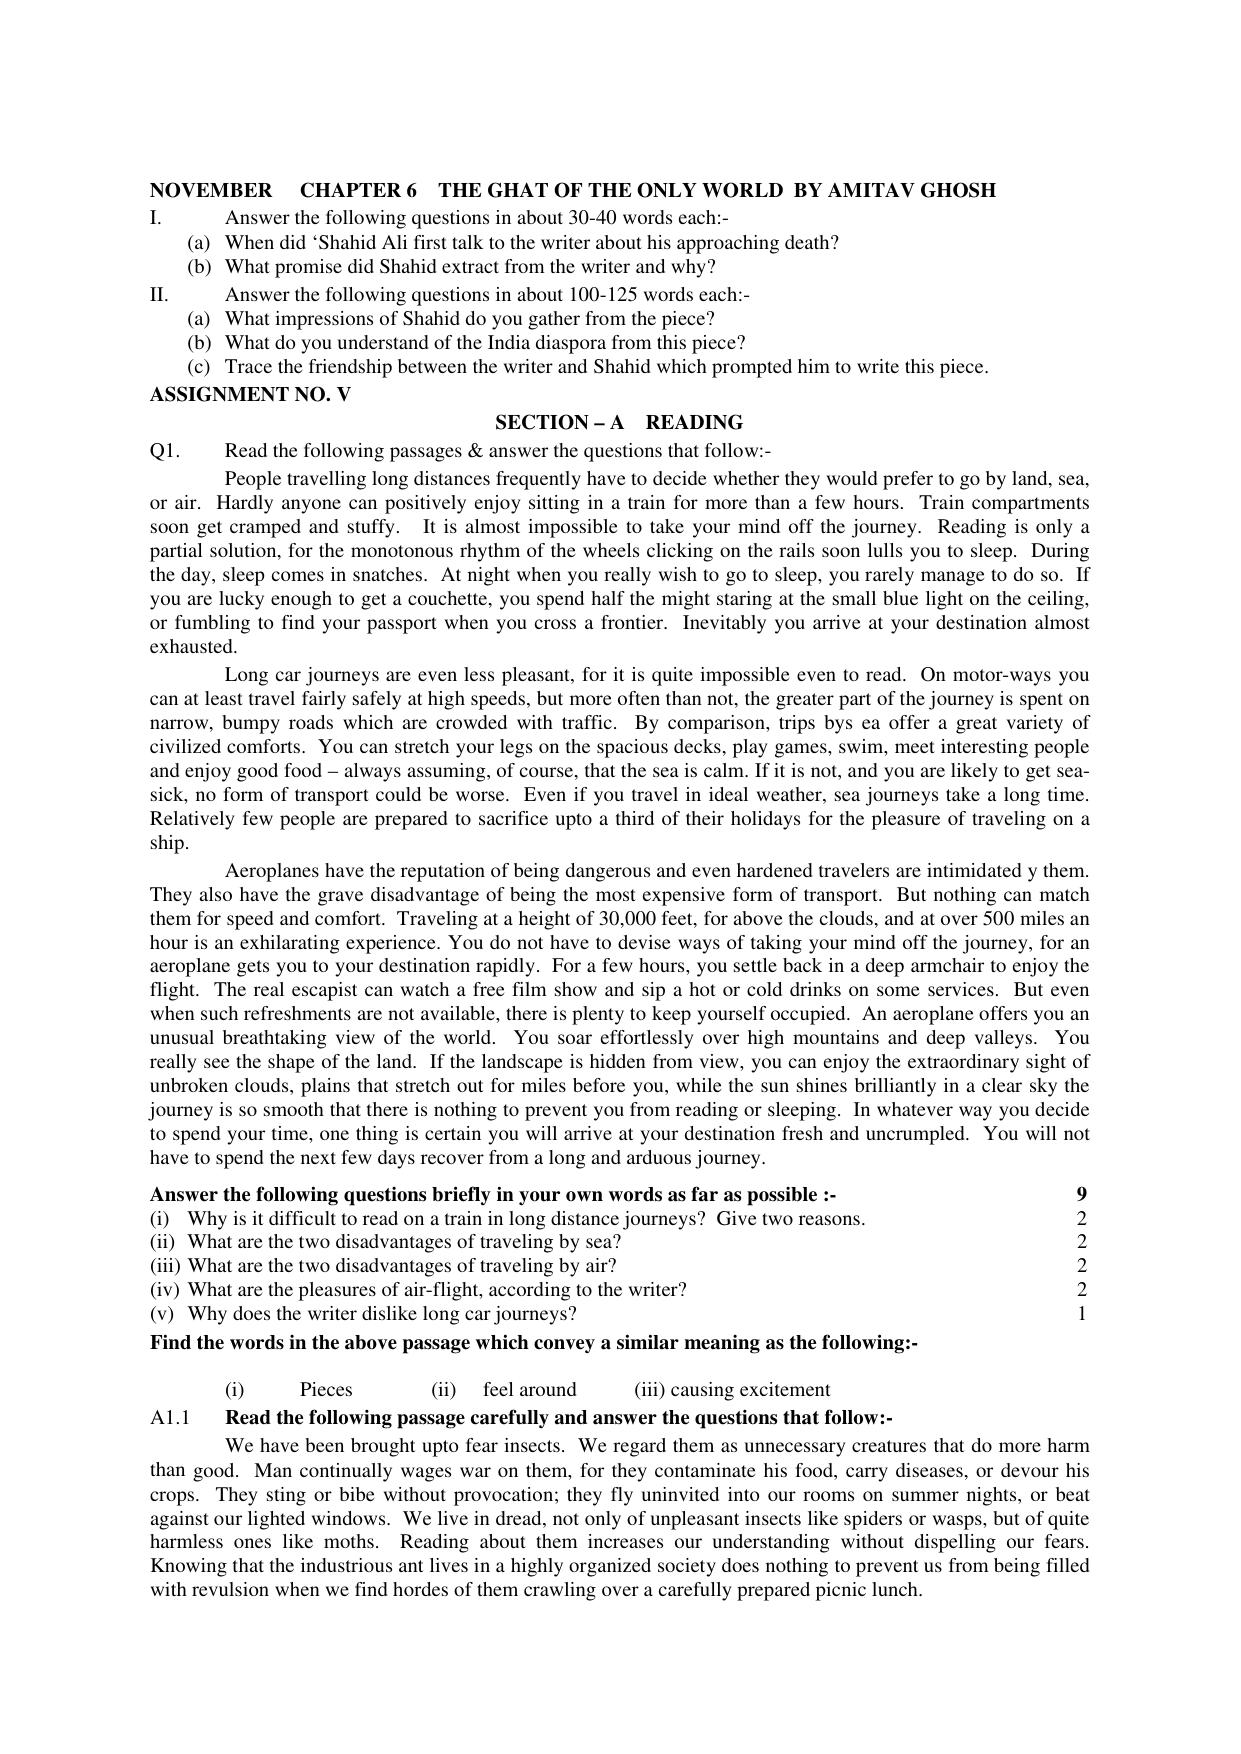 CBSE Worksheets for Class 11 English Assignment 4 - Page 2